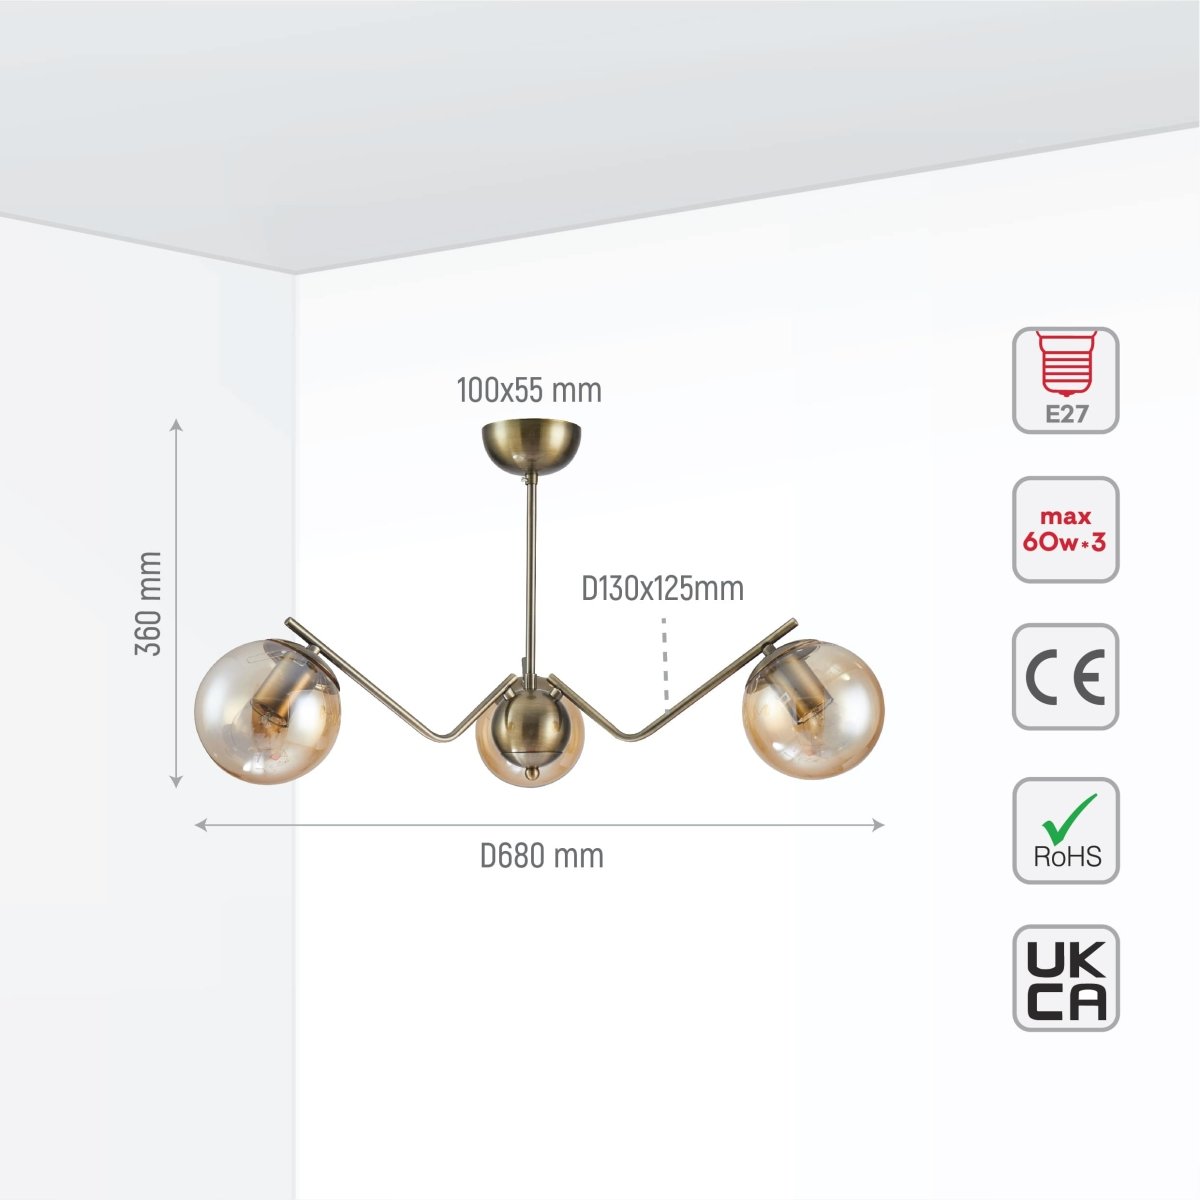 Size and tech specs of Amber Cone Glass Antique Brass Metal Spider Semi Flush Ceiling Light | TEKLED 159-17188